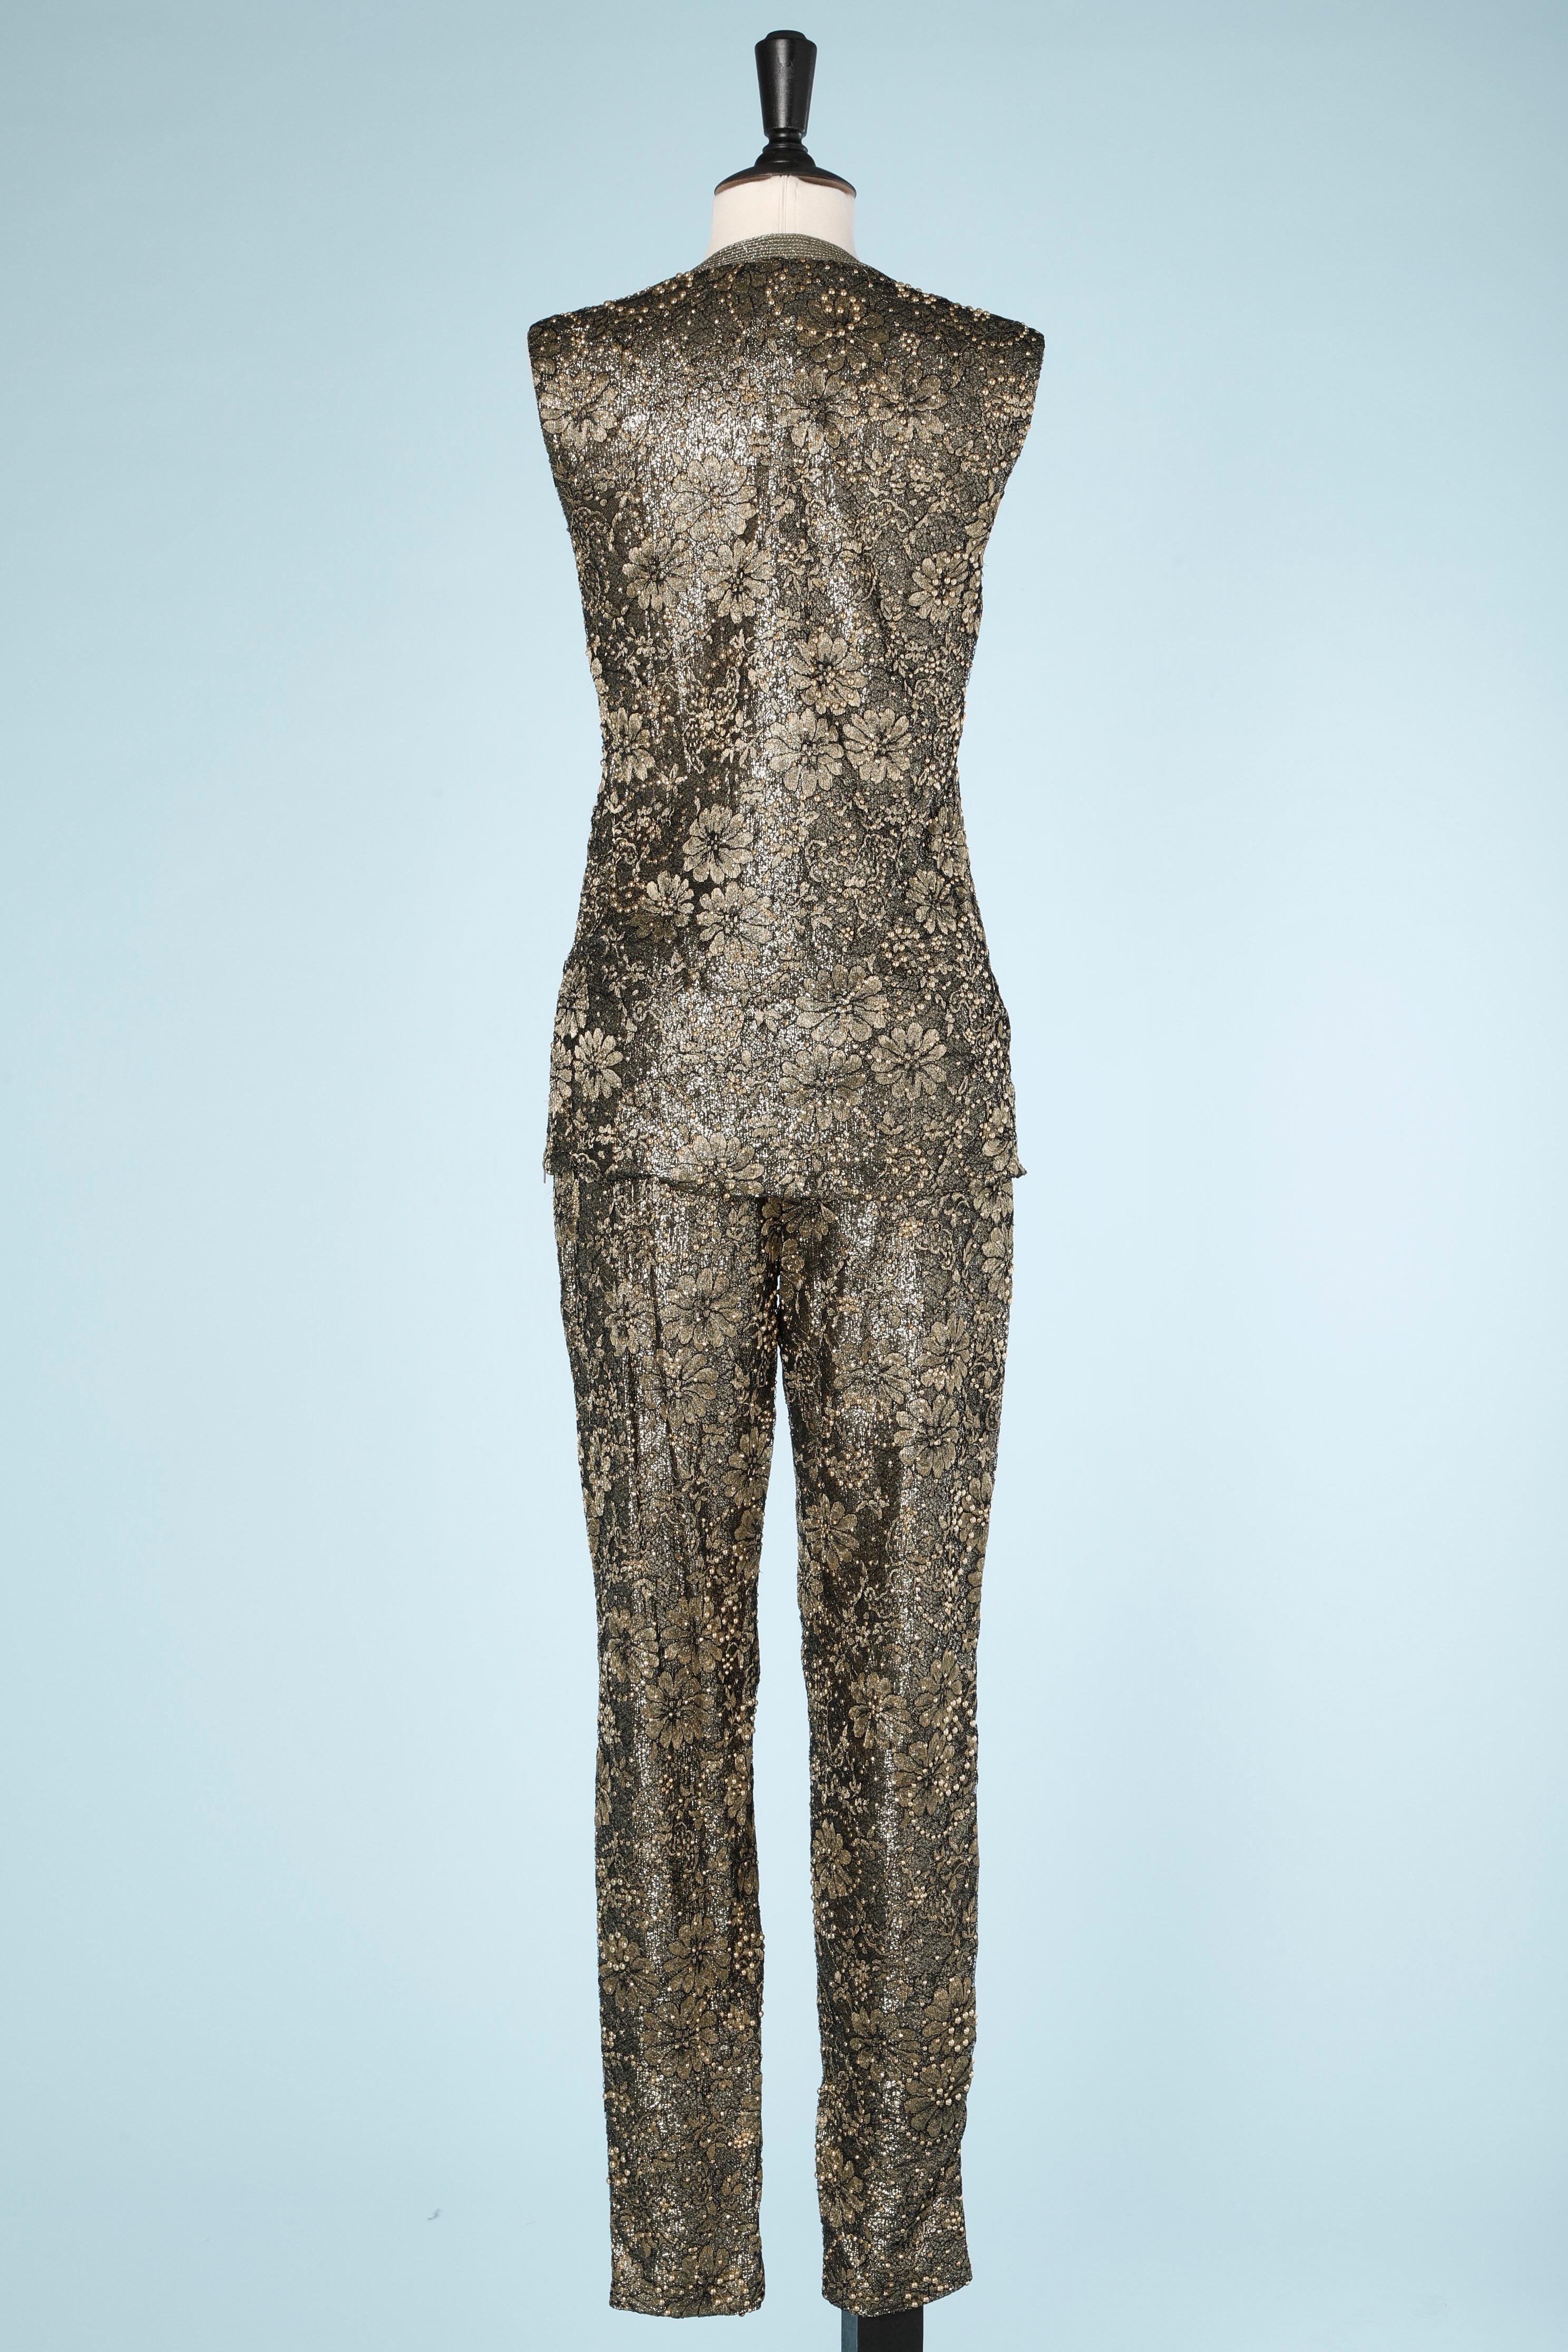 Lace overlay pants and blouse set Gianni Versace In Excellent Condition For Sale In Saint-Ouen-Sur-Seine, FR